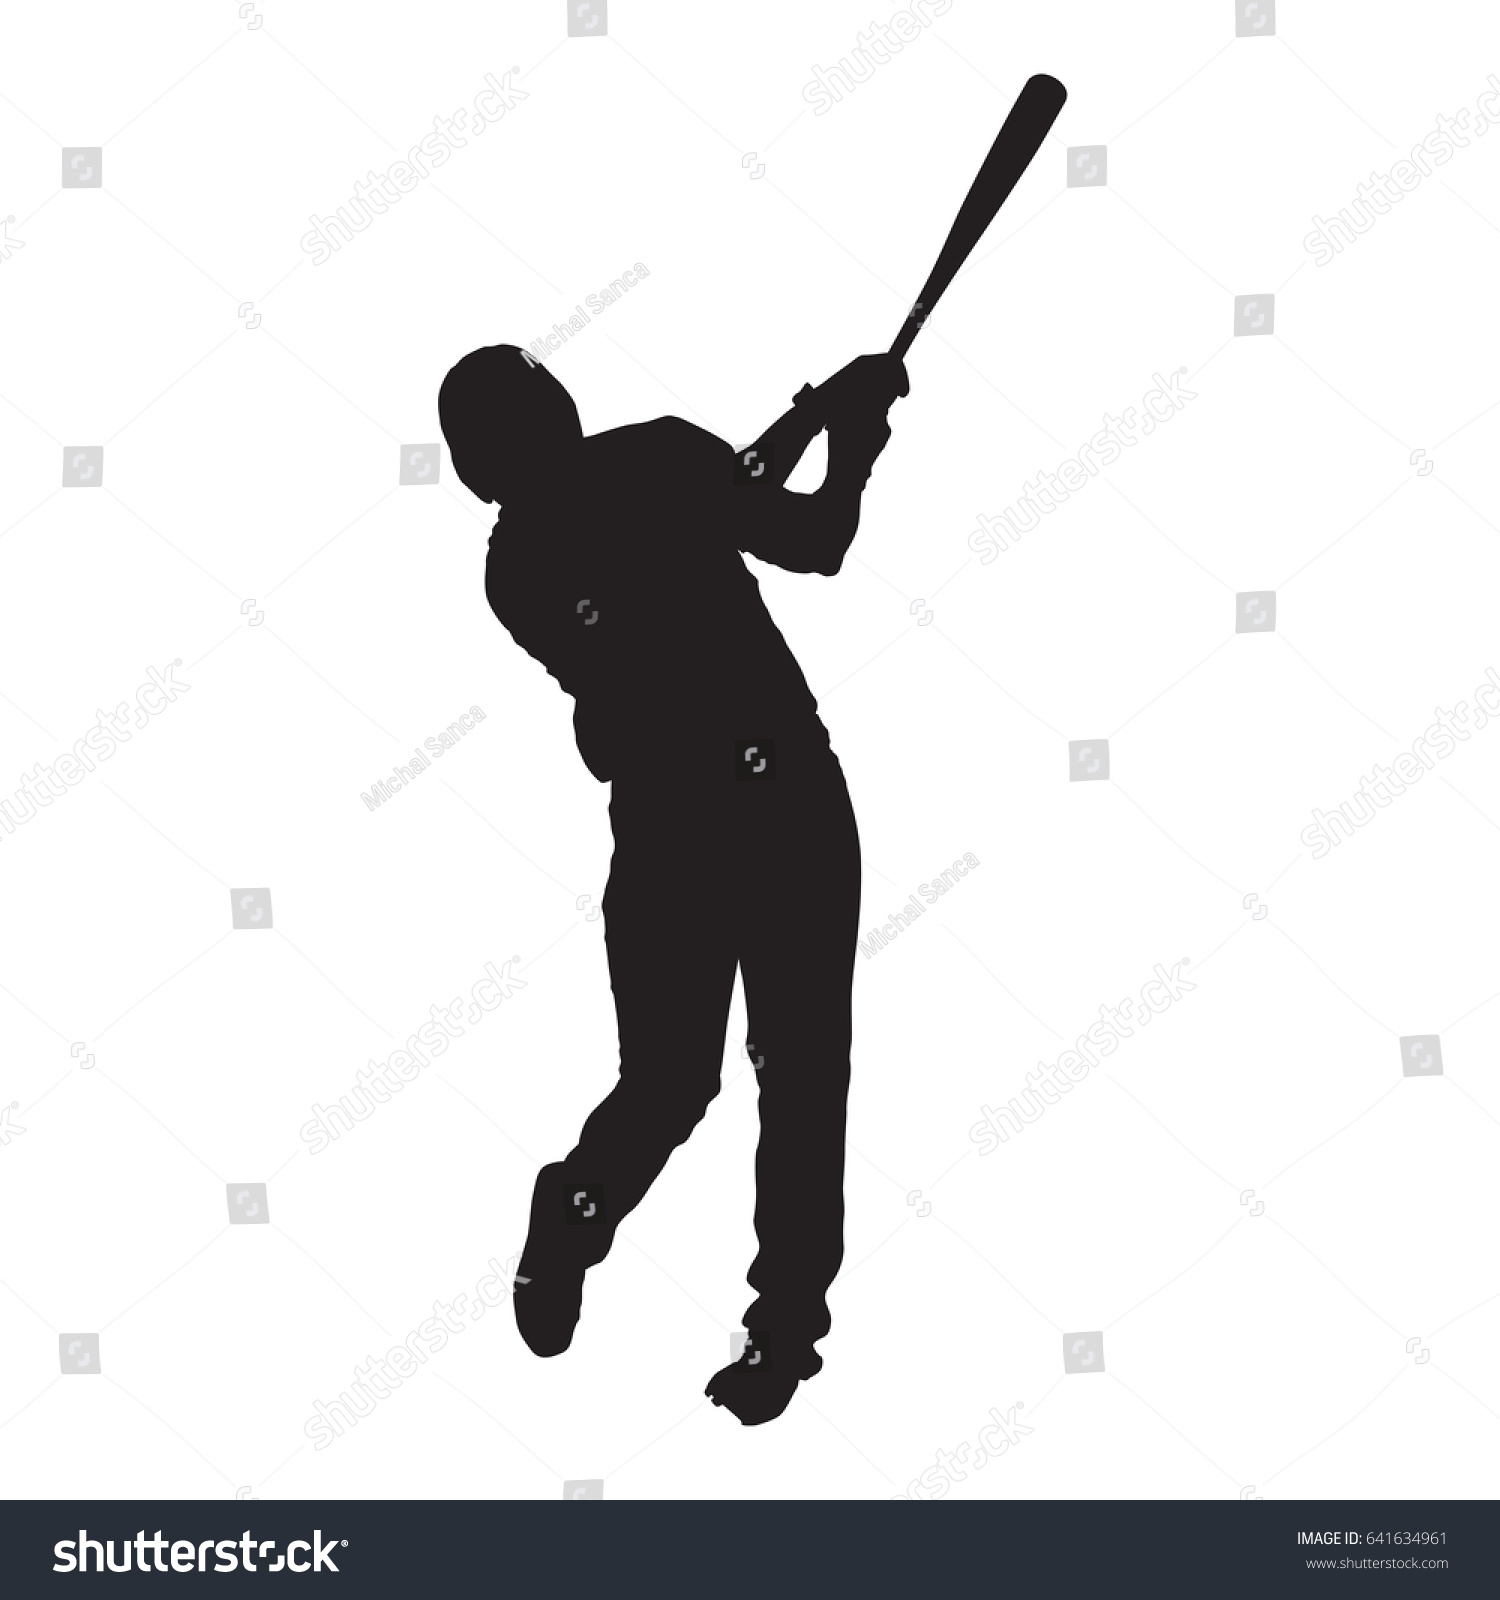 Baseball Player Front View Batter Vector Stock Vector (Royalty Free ...